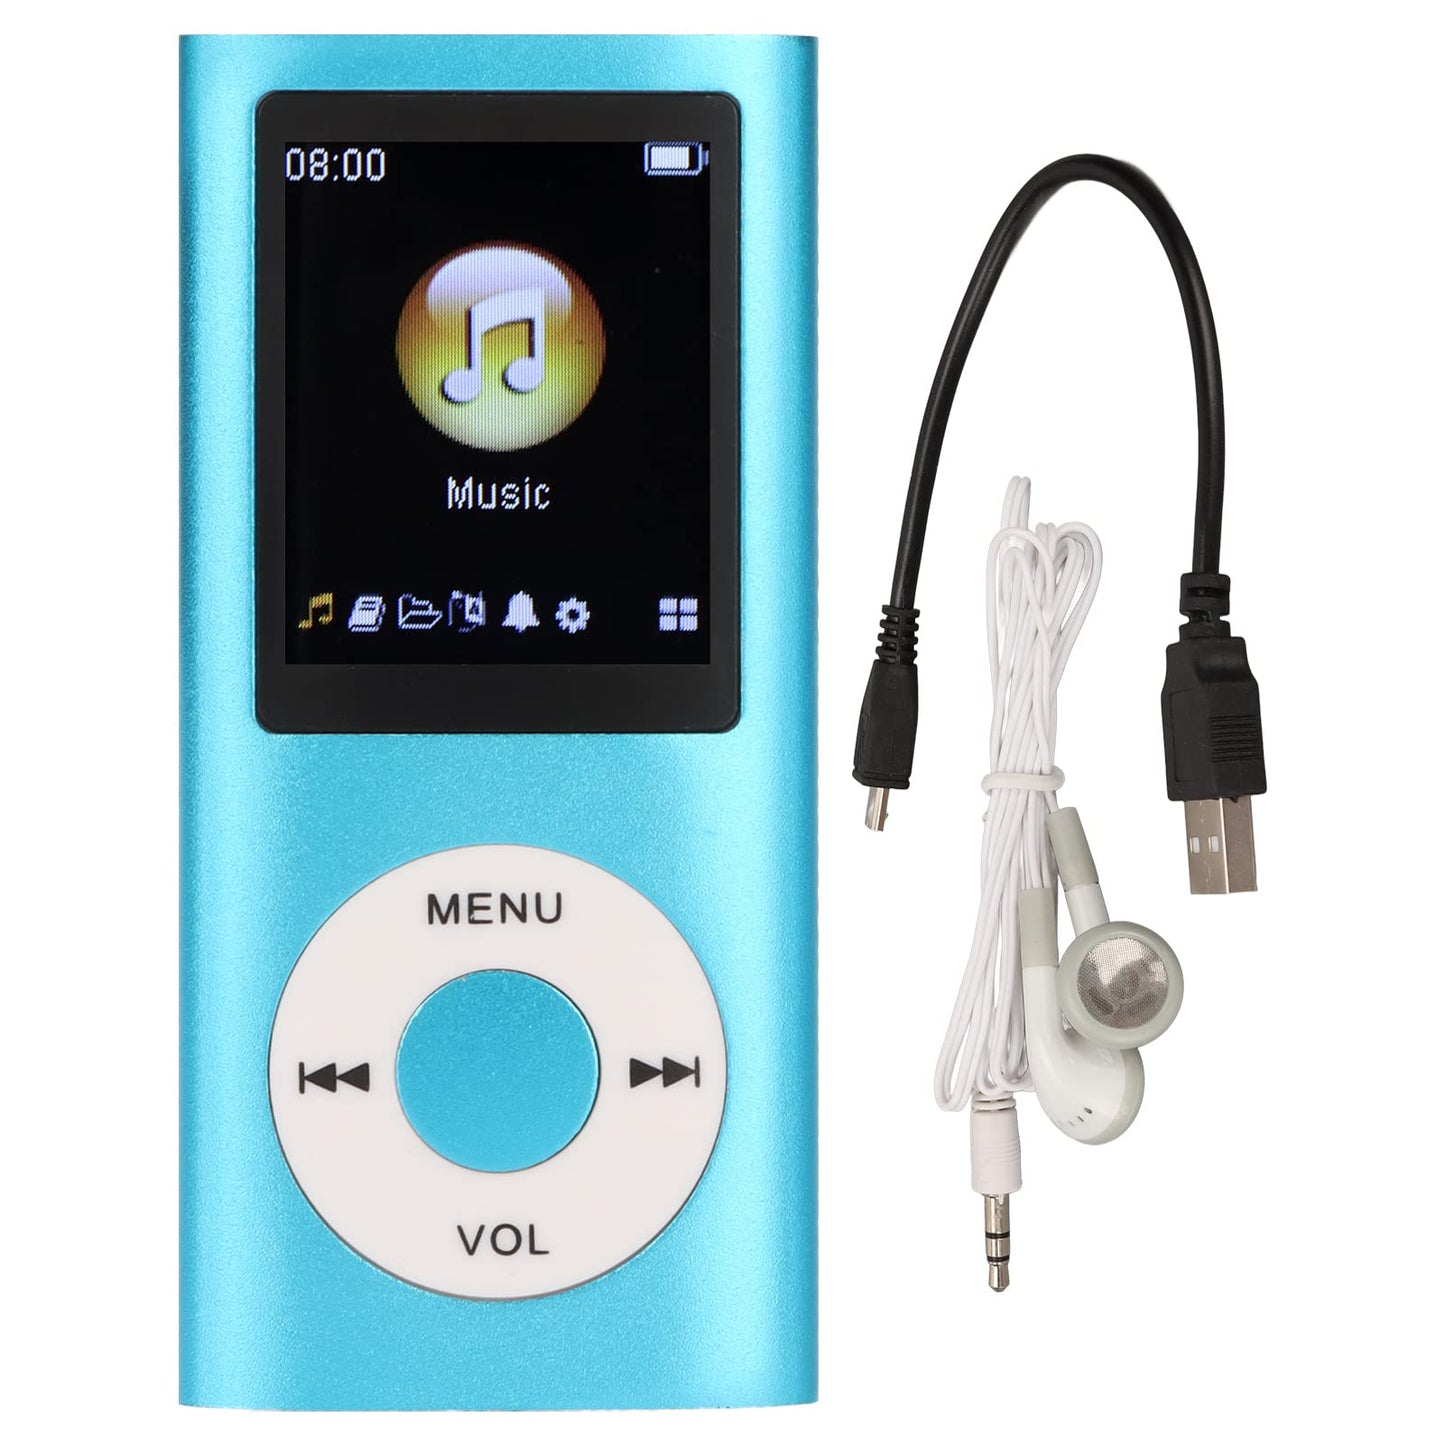 Yctze MP3/MP4 Player, Portable Music Player with Earphone, 1.8 inch HD Screen, Support up to 64GB Memory Card, 8H Playing time, Super Light Metal Shell(Blue)